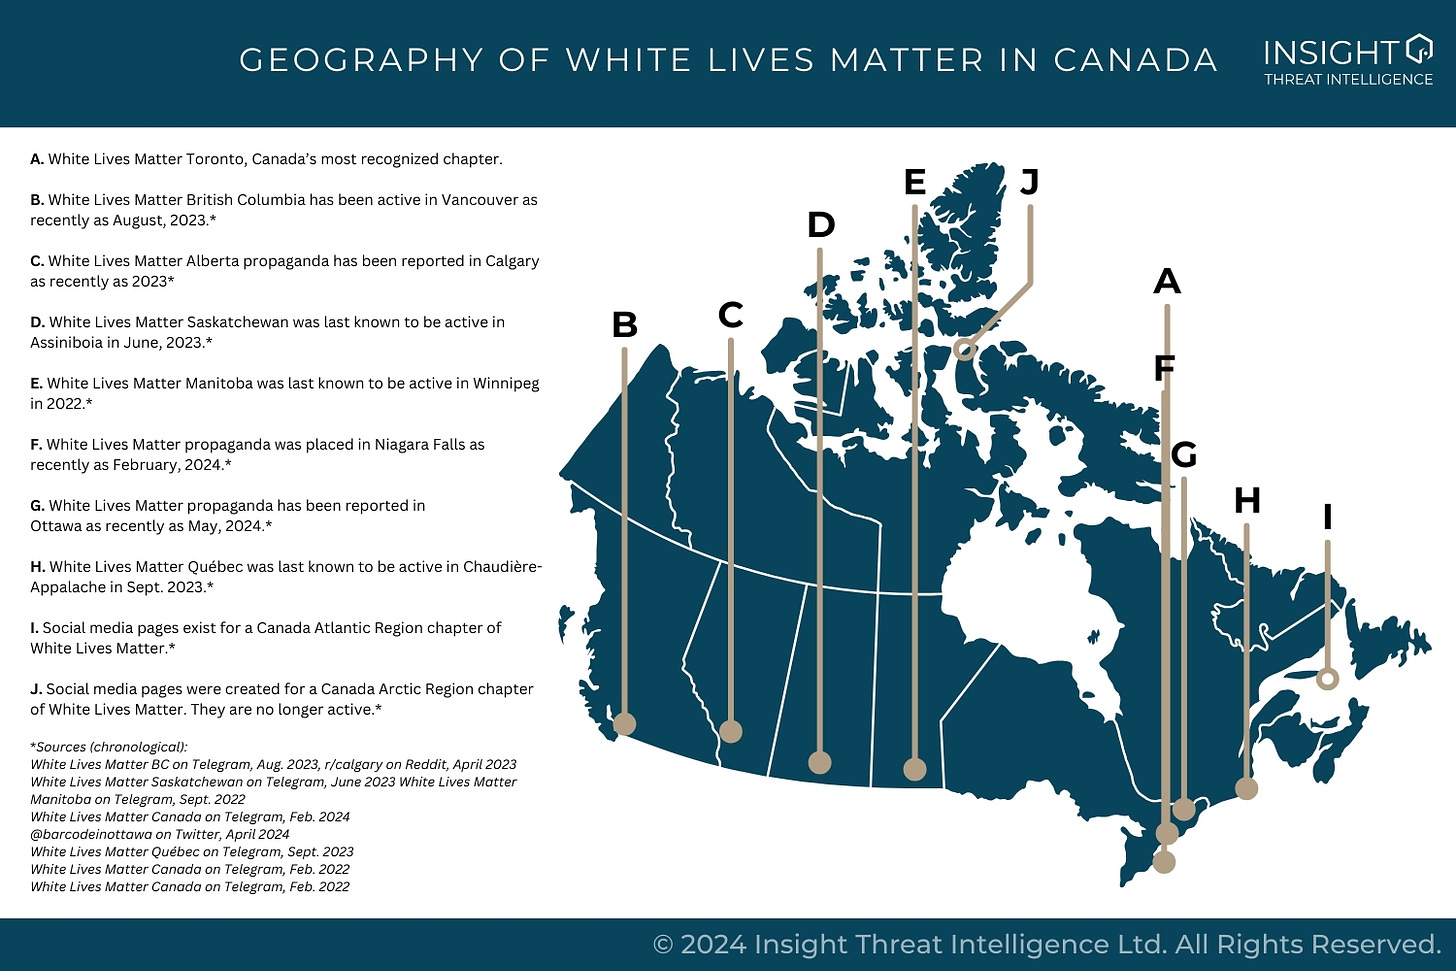 Map titled “Geography of White Lives Matter in Canada,” Its legend reads:  “A. White Lives Matter Toronto, Canada’s most recognized chapter.  B. White Lives Matter British Columbia has been active in Vancouver as recently as August, 2023.*  C. White Lives Matter Alberta propaganda has been reported in Calgary as recently as 2023*  D. White Lives Matter Saskatchewan was last known to be active in Assiniboia in June, 2023.*  E. White Lives Matter Manitoba was last known to be active in Winnipeg in 2022.*  F. White Lives Matter propaganda was placed in Niagara Falls as recently as February, 2024.*  G. White Lives Matter propaganda has been reported in  Ottawa as recently as May, 2024.*  H. White Lives Matter Québec was last known to be active in Chaudière-Appalache in Sept. 2023.*  I. Social media pages exist for a Canada Atlantic Region chapter of White Lives Matter.*  J. Social media pages were created for a Canada Arctic Region chapter of White Lives Matter. They are no longer active.*  *Sources (chronological):  White Lives Matter BC on Telegram, Aug. 2023, r/calgary on Reddit, April 2023  White Lives Matter Saskatchewan on Telegram, June 2023 White Lives Matter Manitoba on Telegram, Sept. 2022  White Lives Matter Canada on Telegram, Feb. 2024  @barcodeinottawa on Twitter, April 2024  White Lives Matter Québec on Telegram, Sept. 2023  White Lives Matter Canada on Telegram, Feb. 2022  White Lives Matter Canada on Telegram, Feb. 2022”